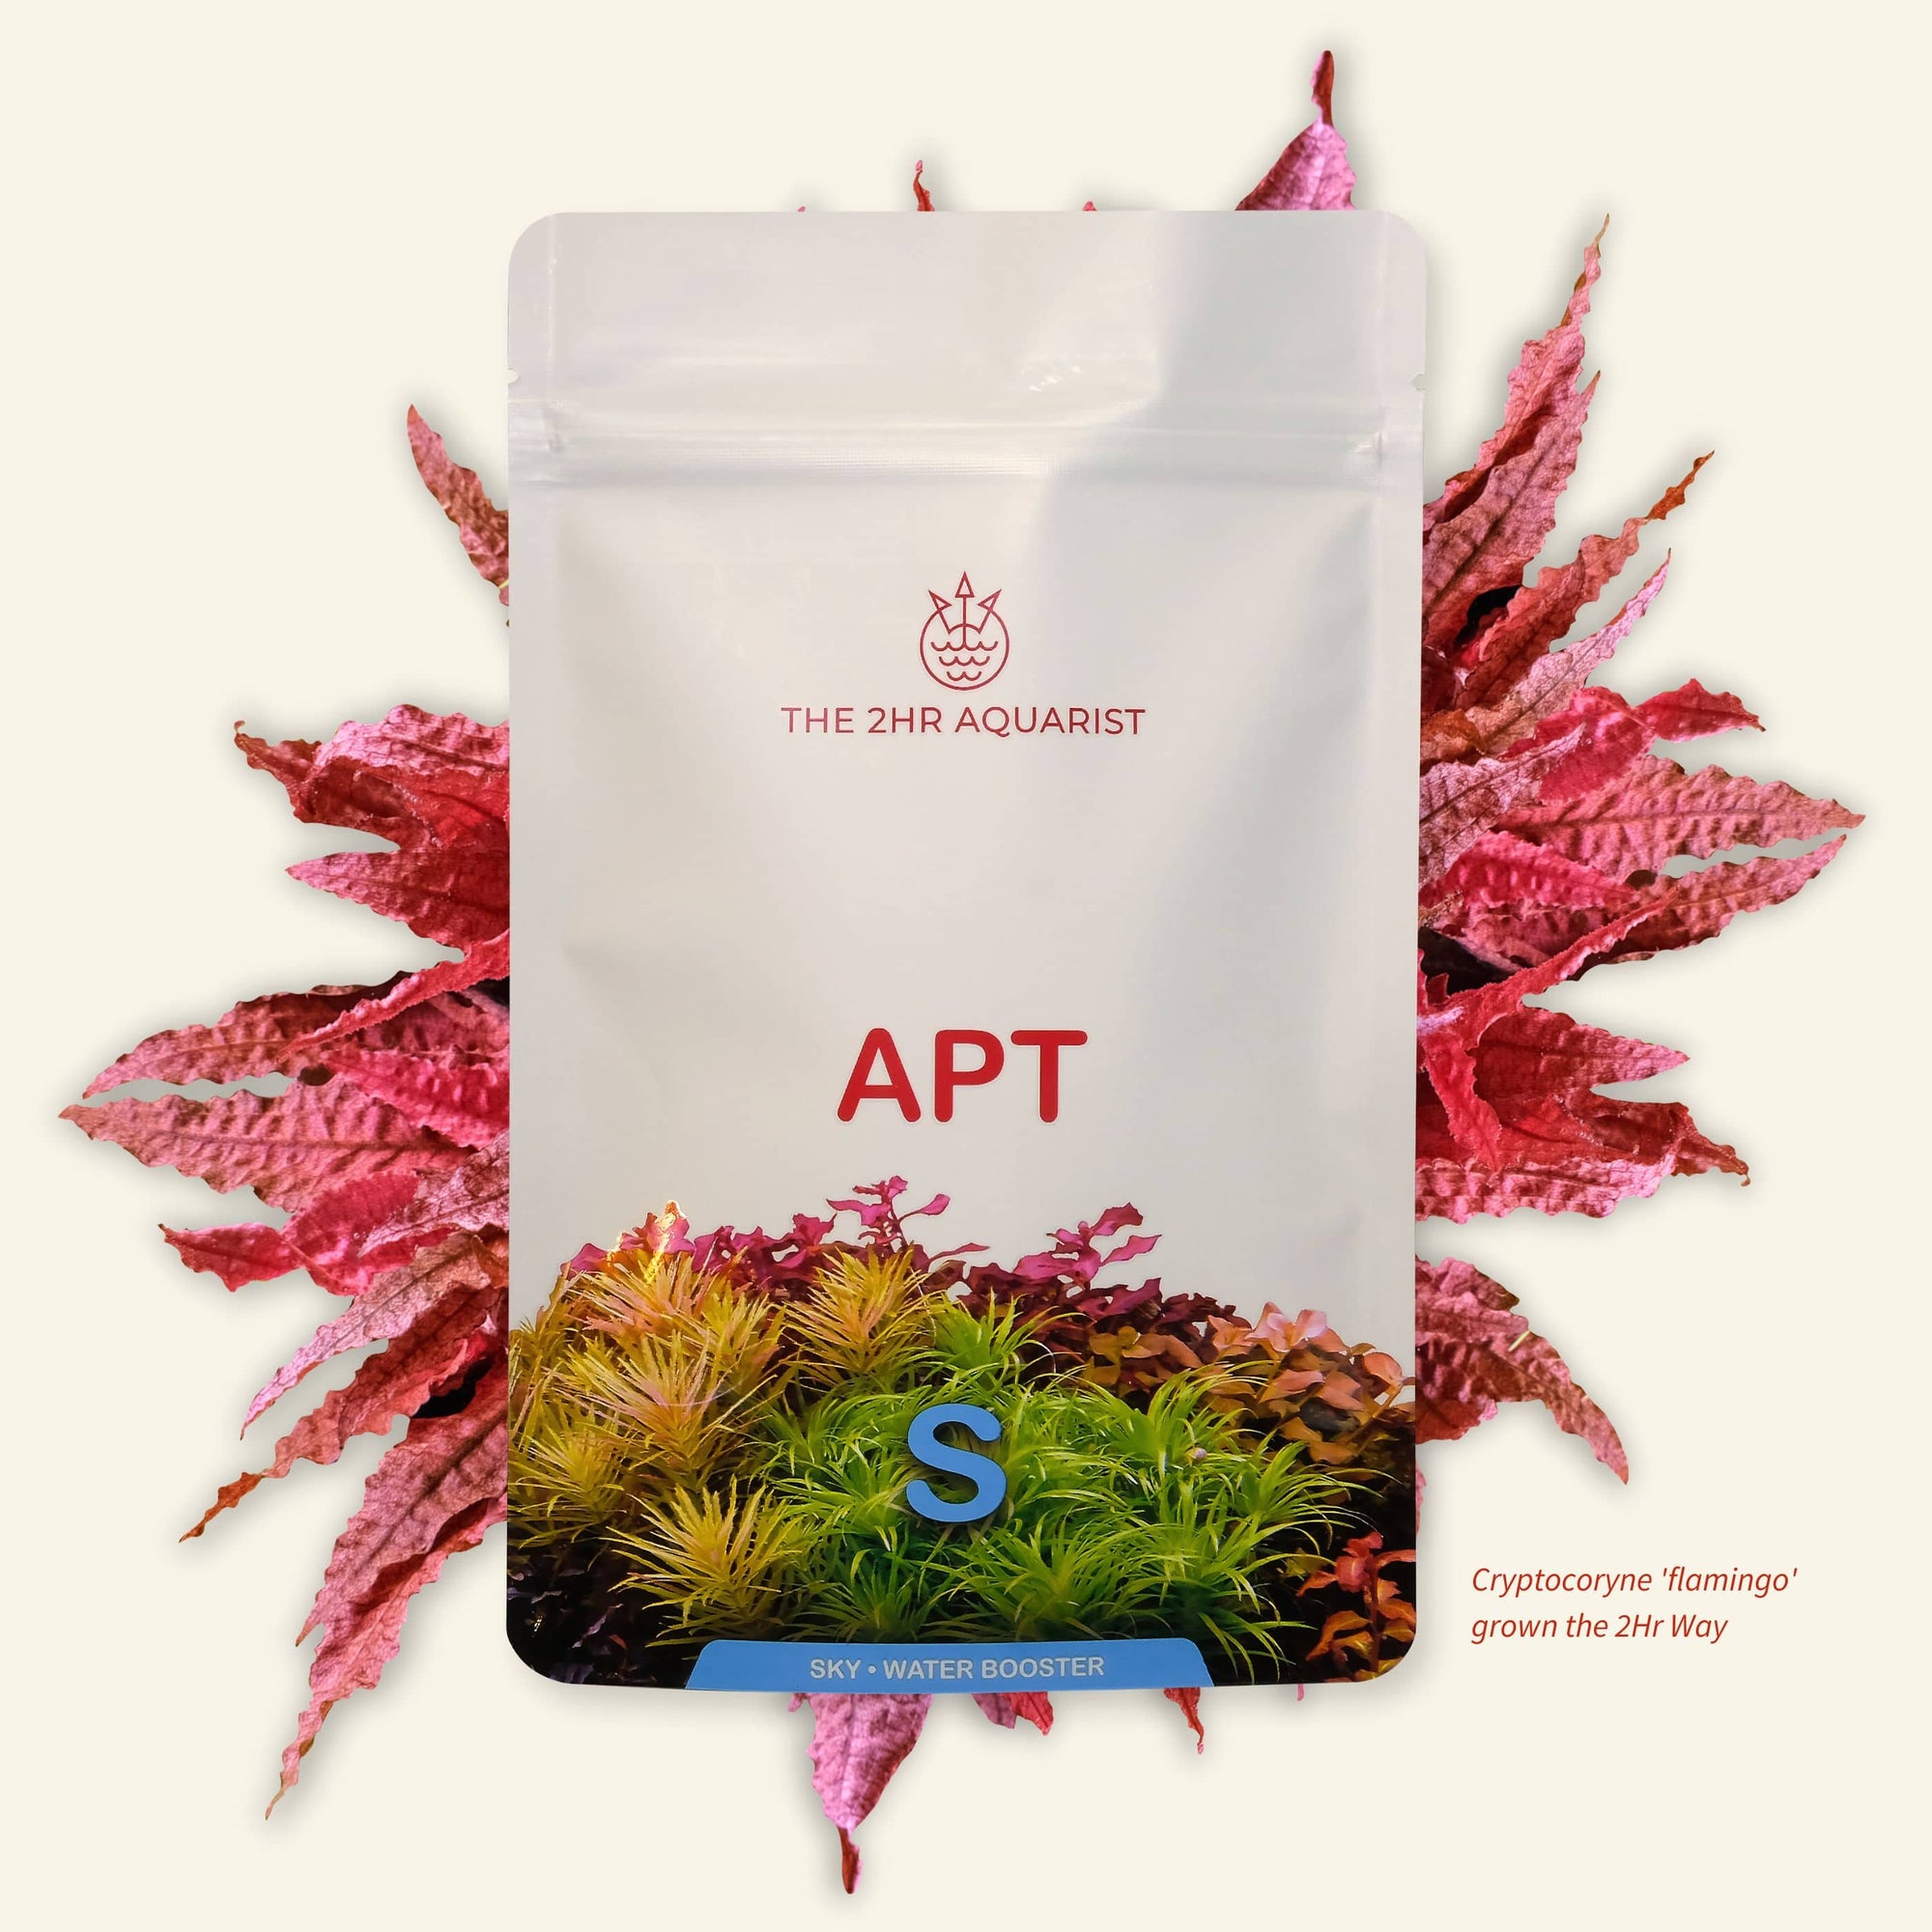 2Hr Aquarist APT Sky is a gh booster that enable shrimps and hardwater plants to thrive together with softwater plants